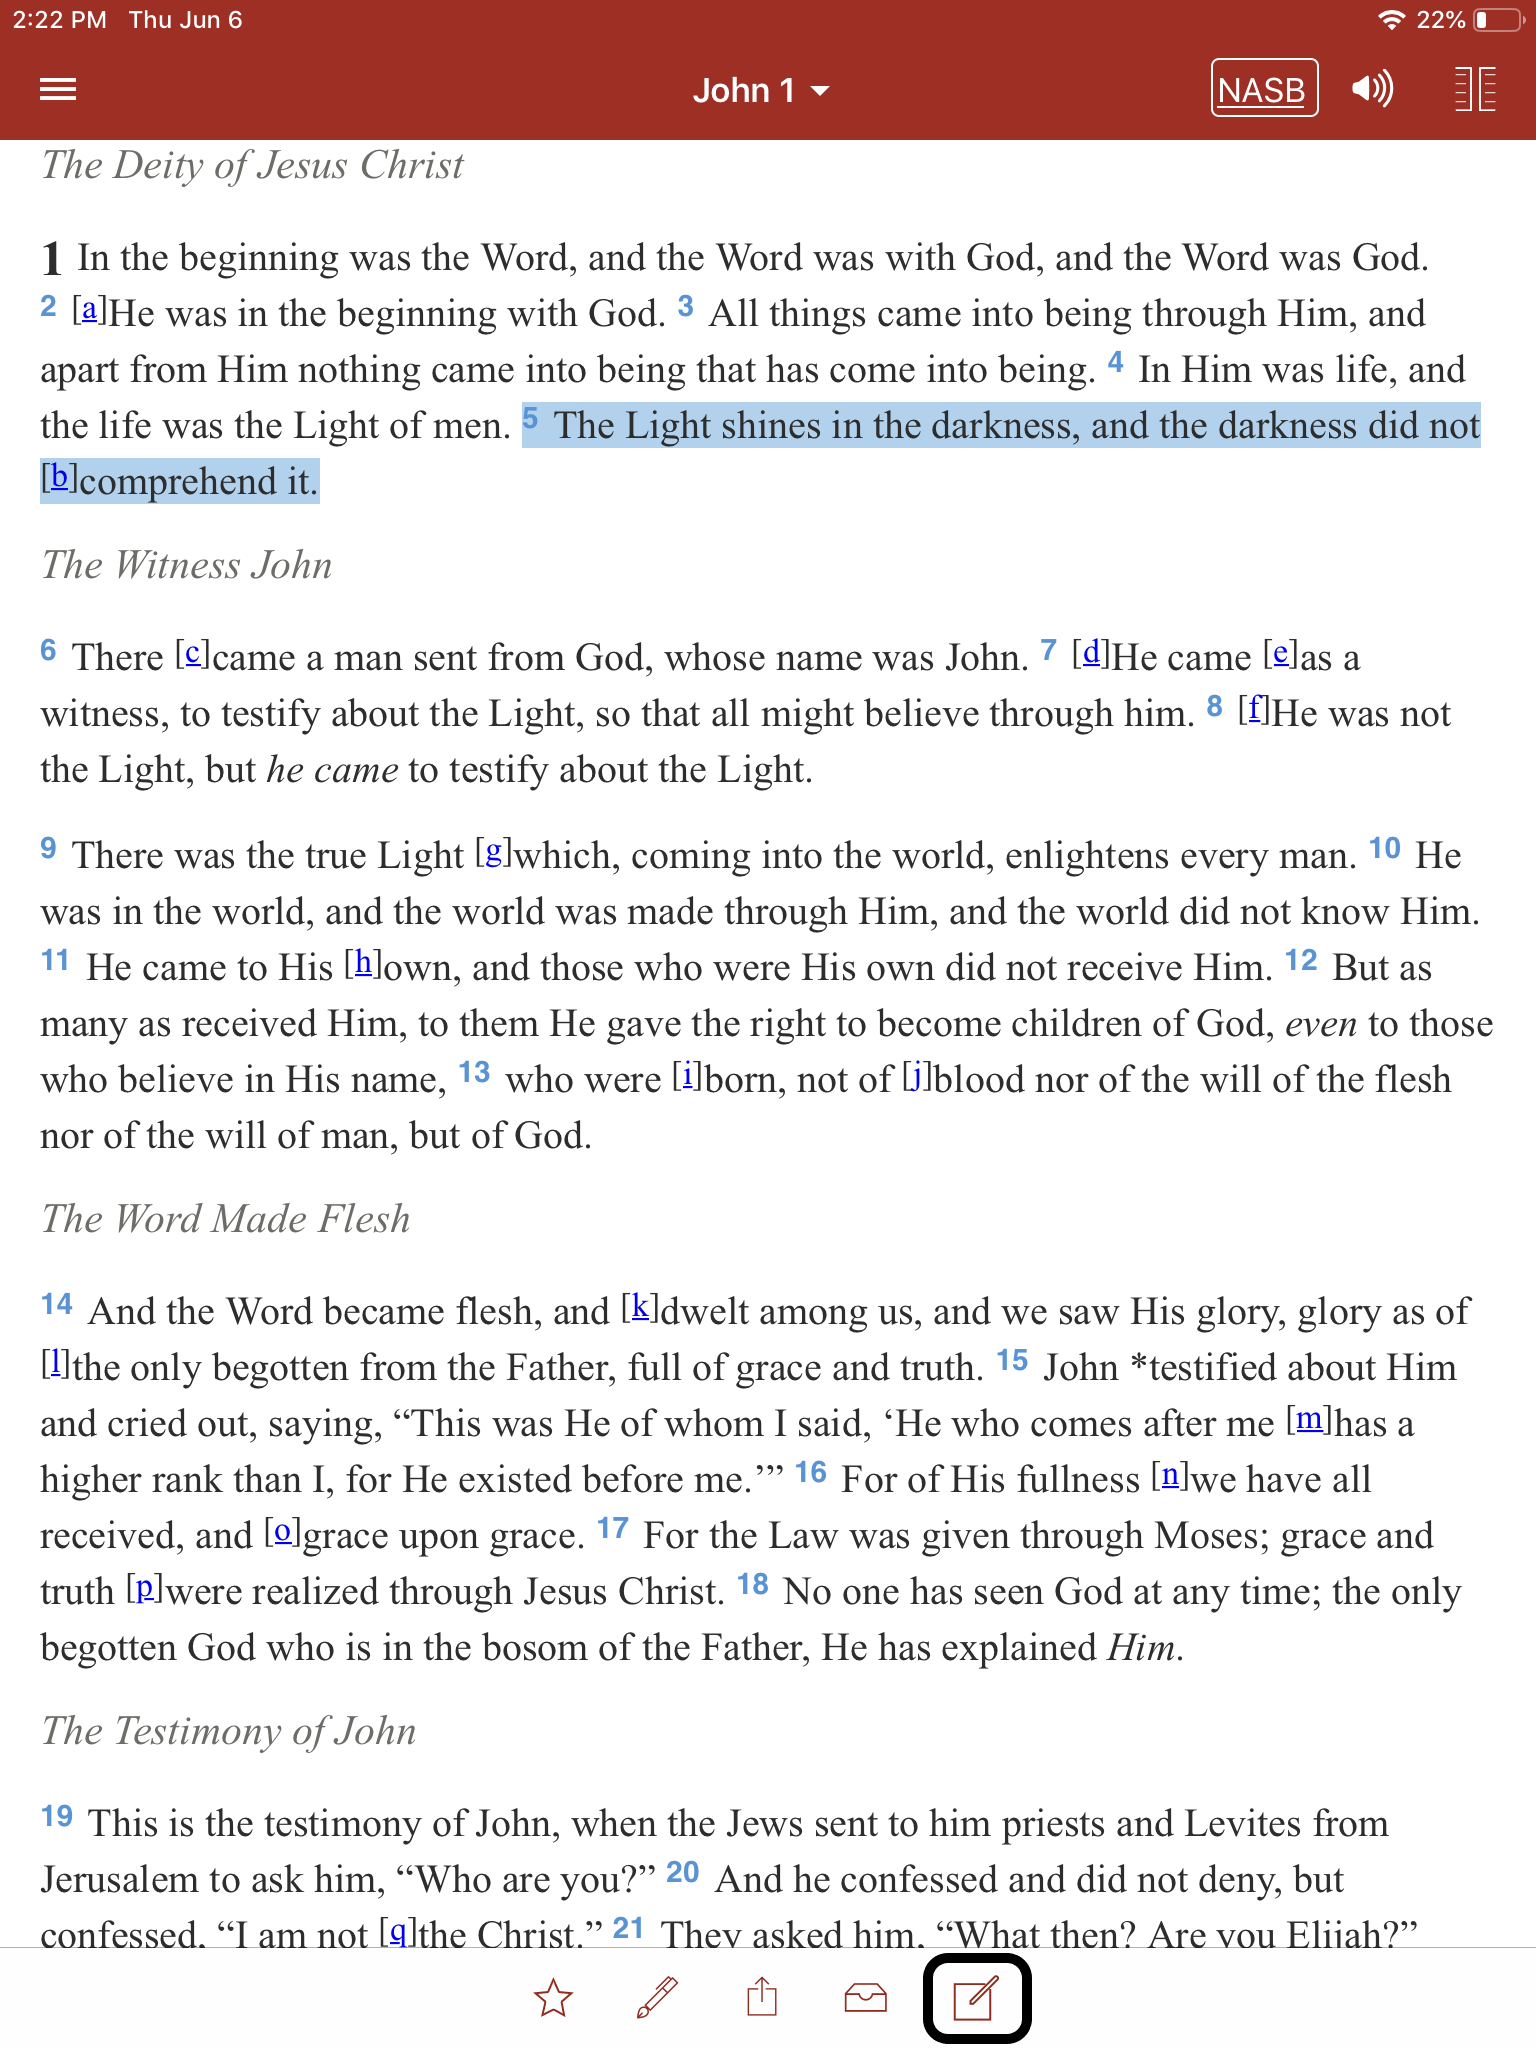 BG_iOS_Bible_Screen_WITH_sHARE_bOX.png